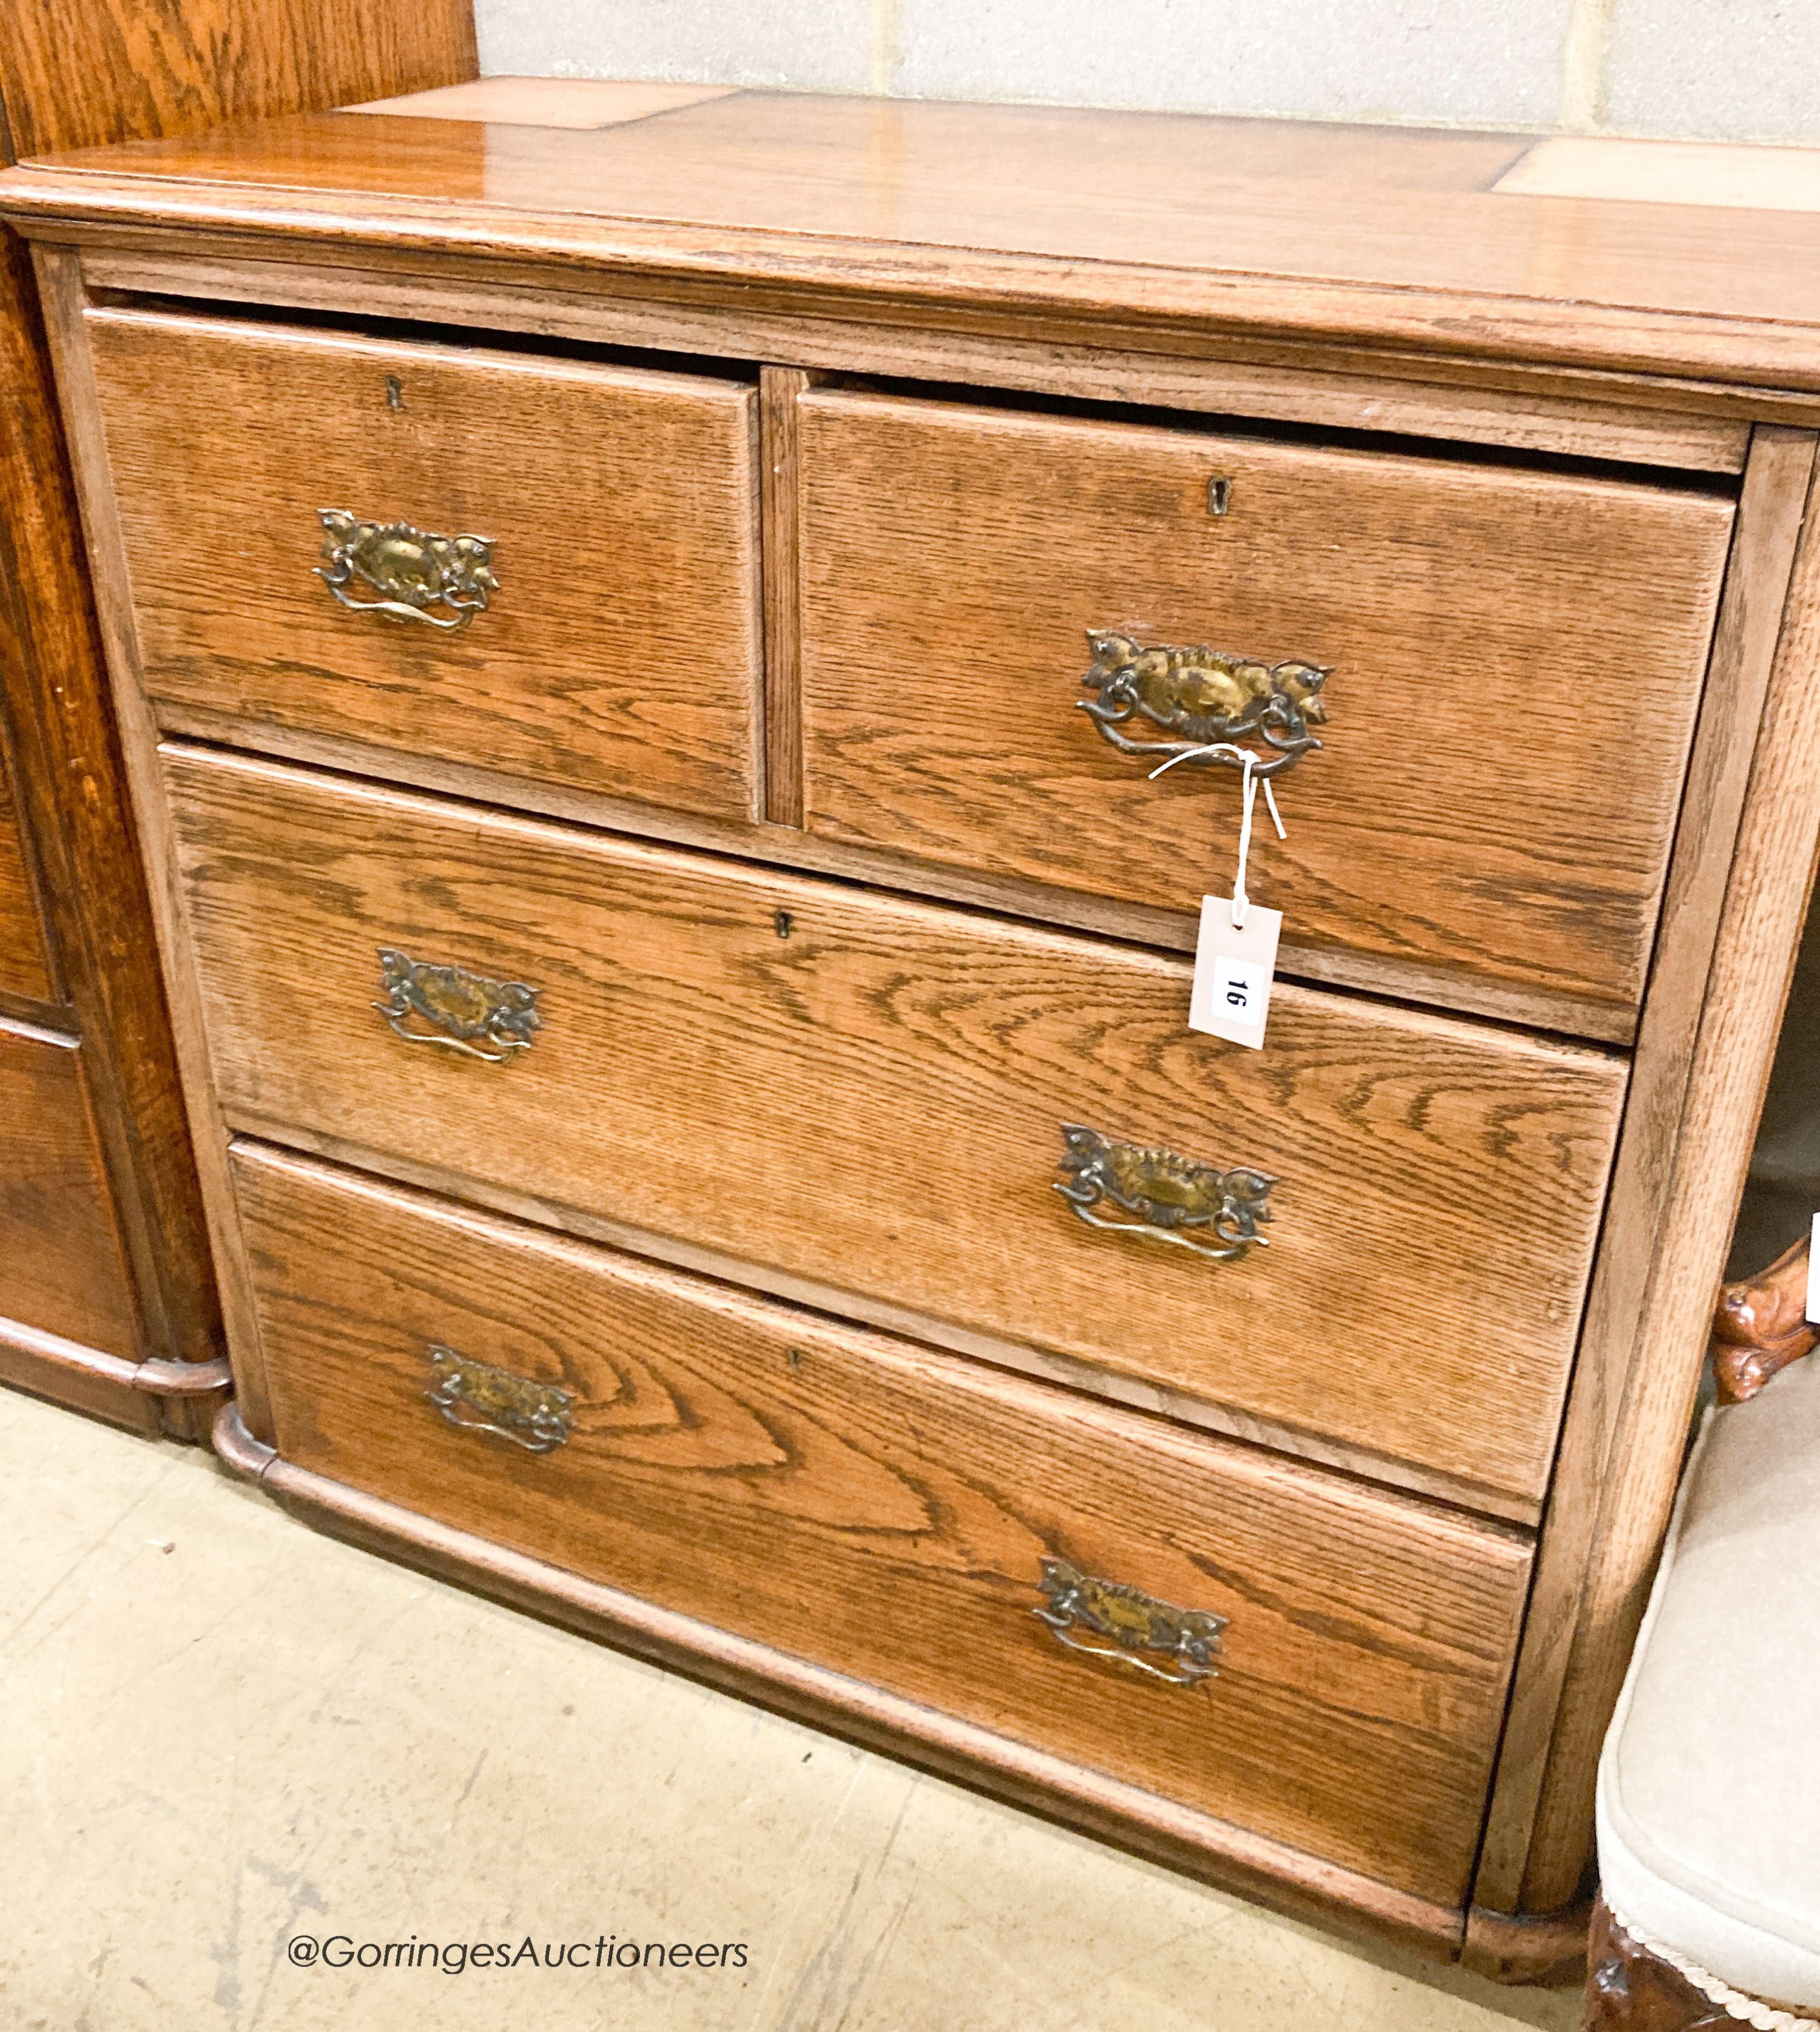 A late Victorian oak chest of drawers (formerly a dressing chest), width 96cm, depth 50cm, height 95cm